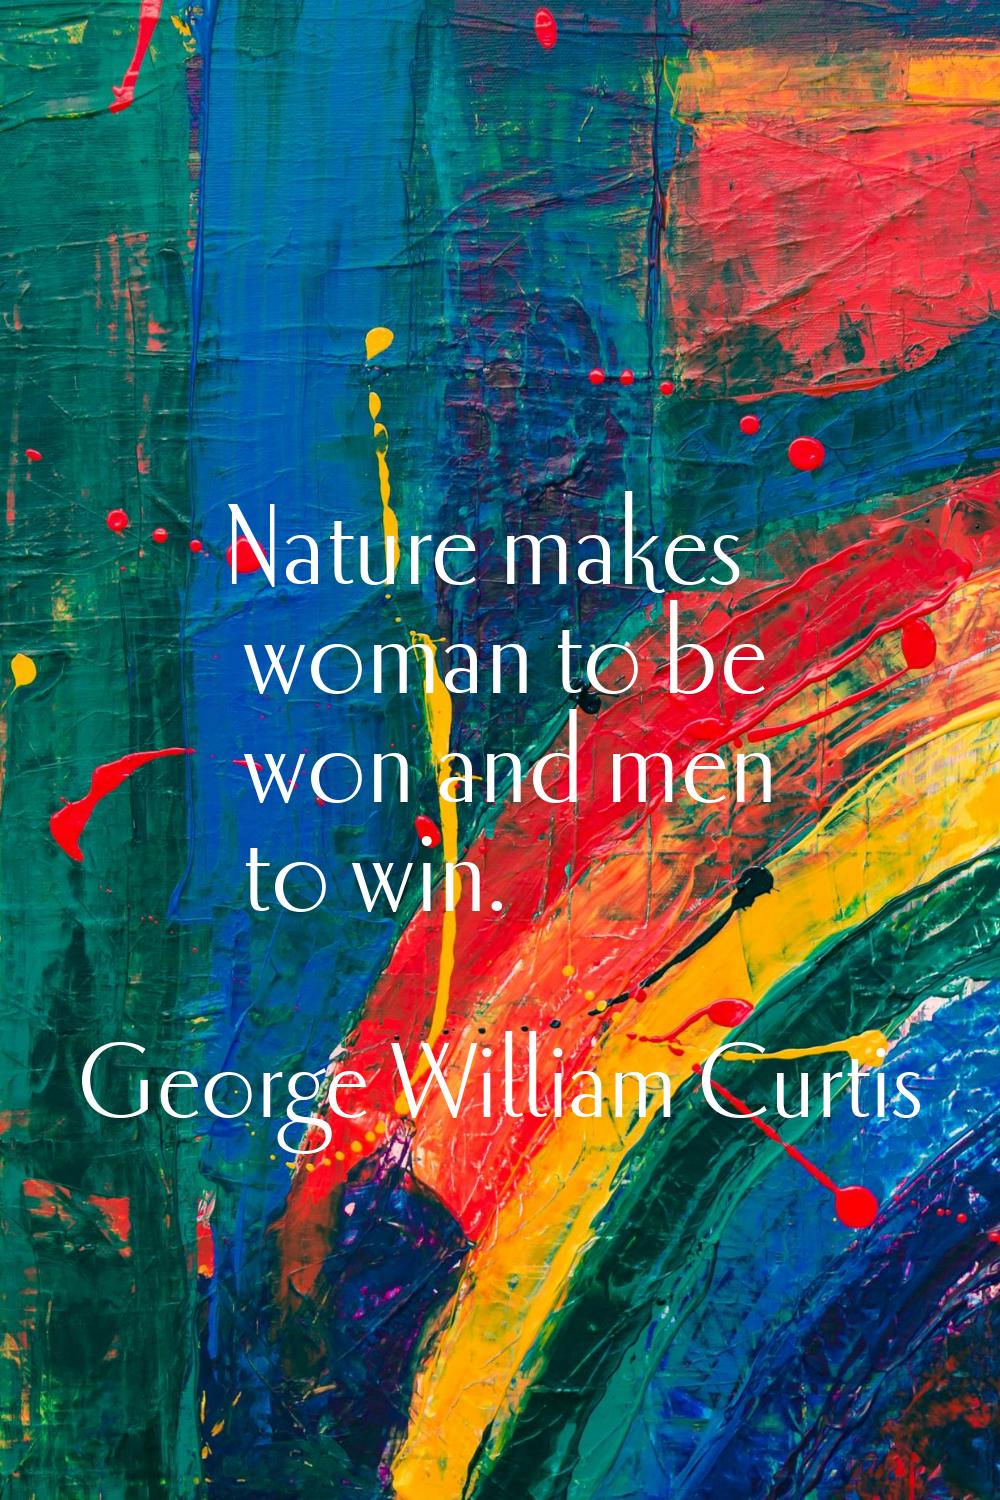 Nature makes woman to be won and men to win.